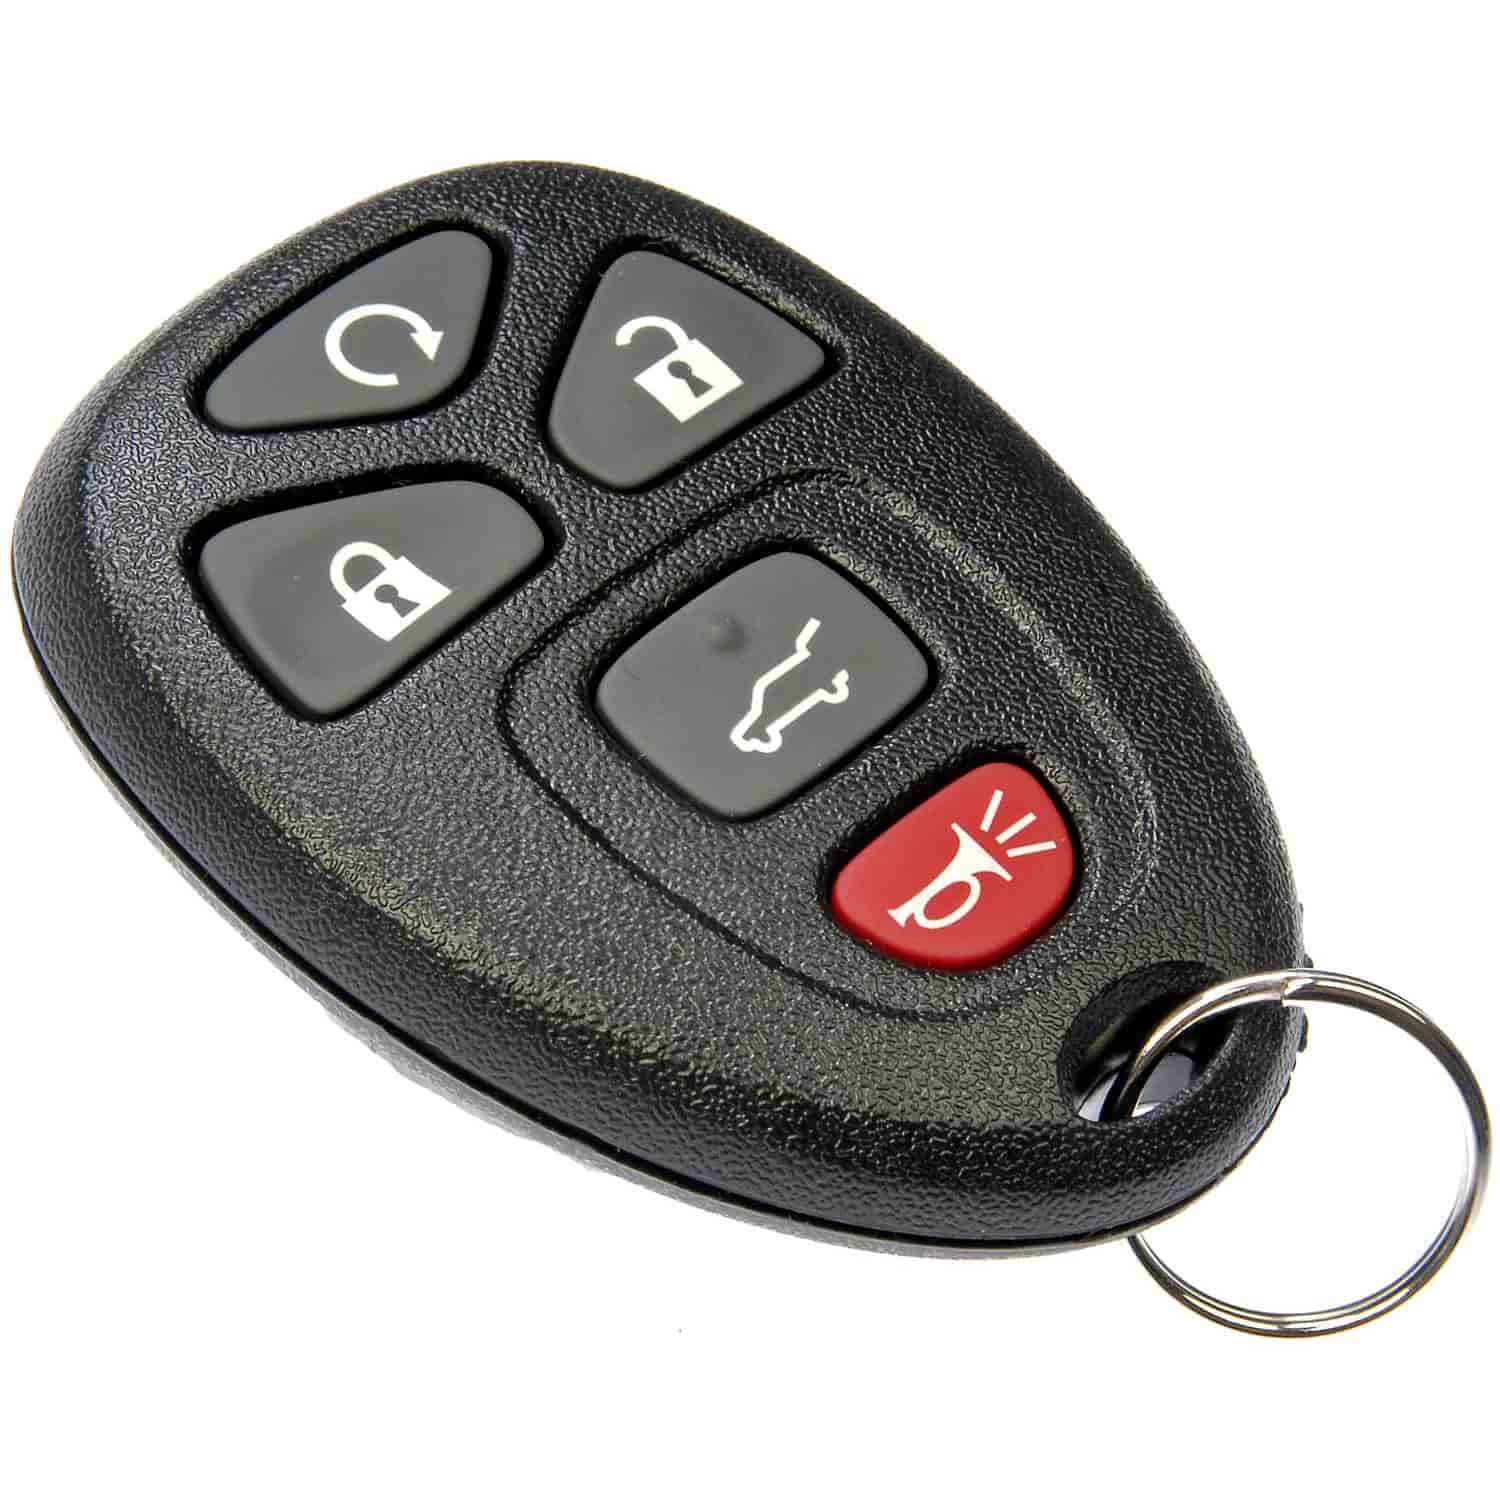 Keyless Entry Remote 2007-2010 Chevy/GMC, 2007-2010 Cadillac/Saturn, 2008-2010 Buick - 5-Button